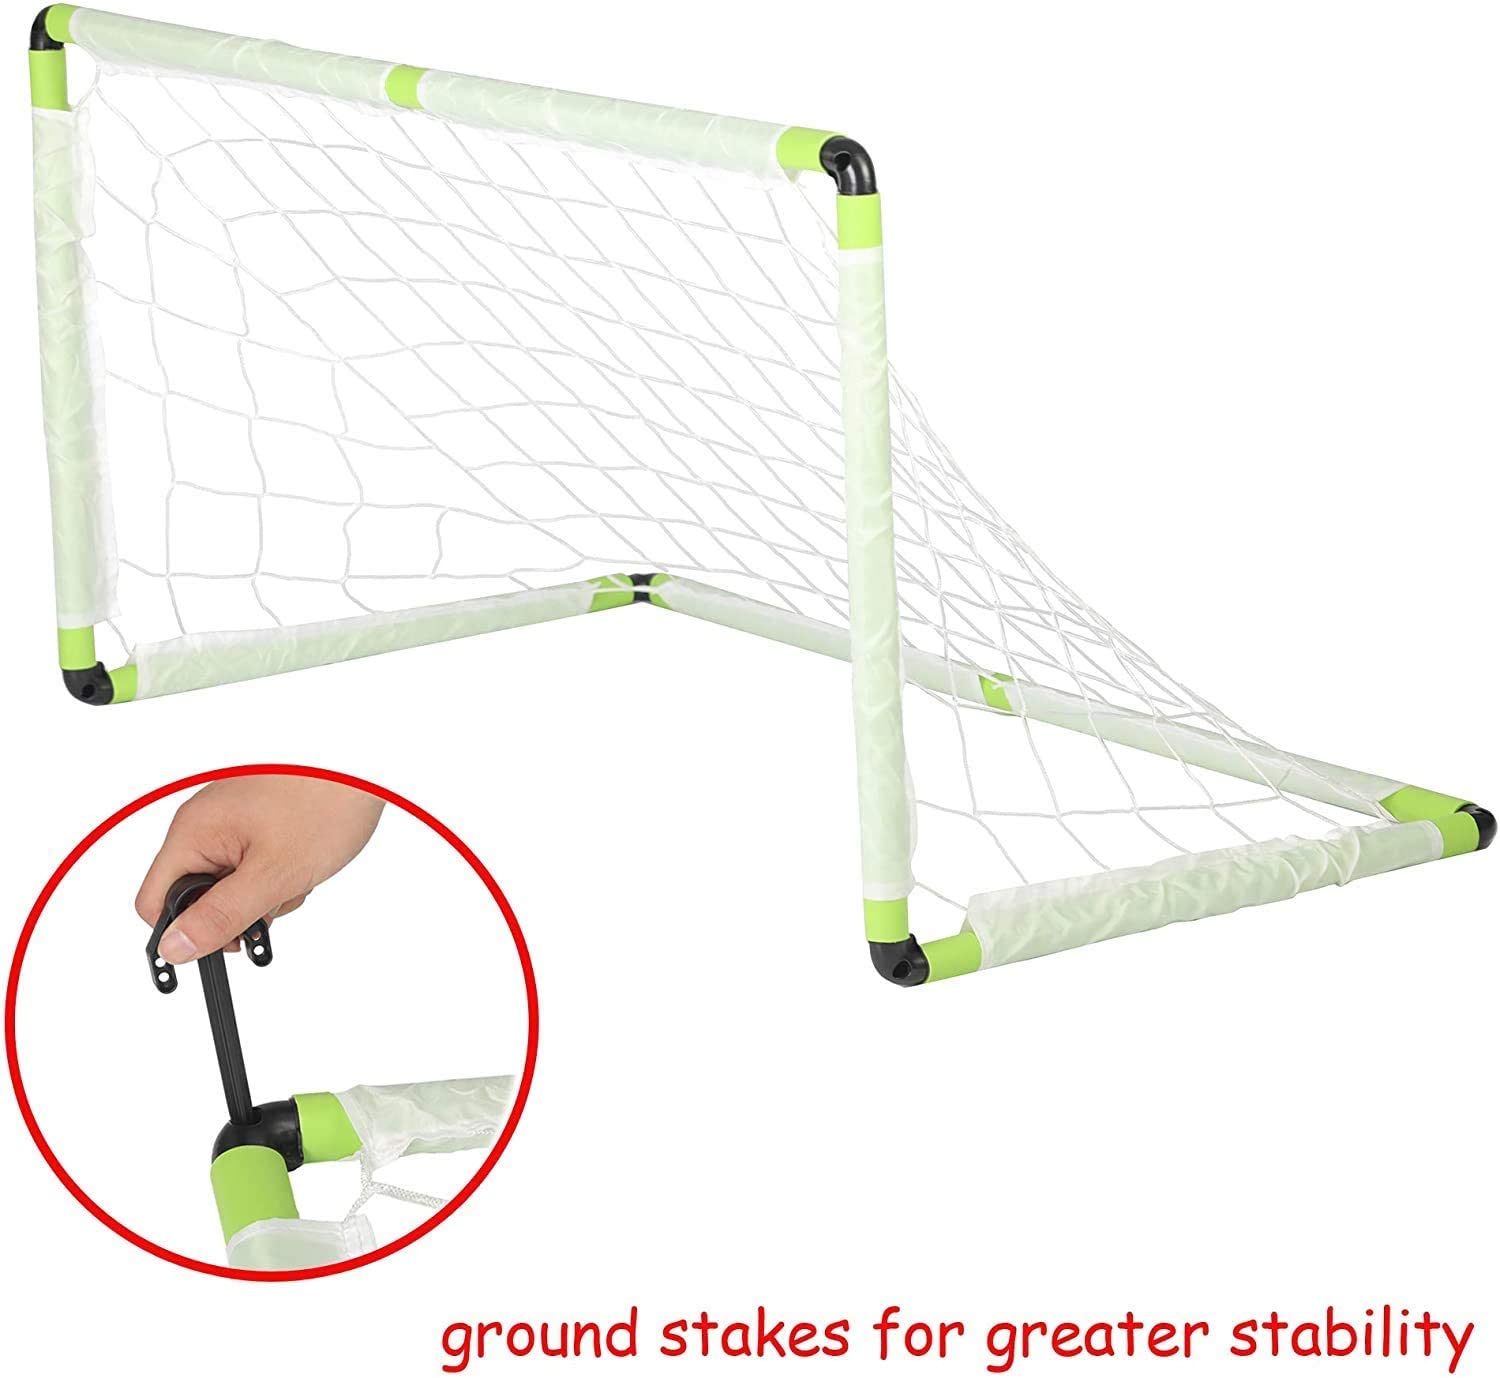 Kids Soccer Goal Portable Football Practice Net with Carry Bag and 4 Ground Stakes for Games and Training,48 x 24 x 24 inches